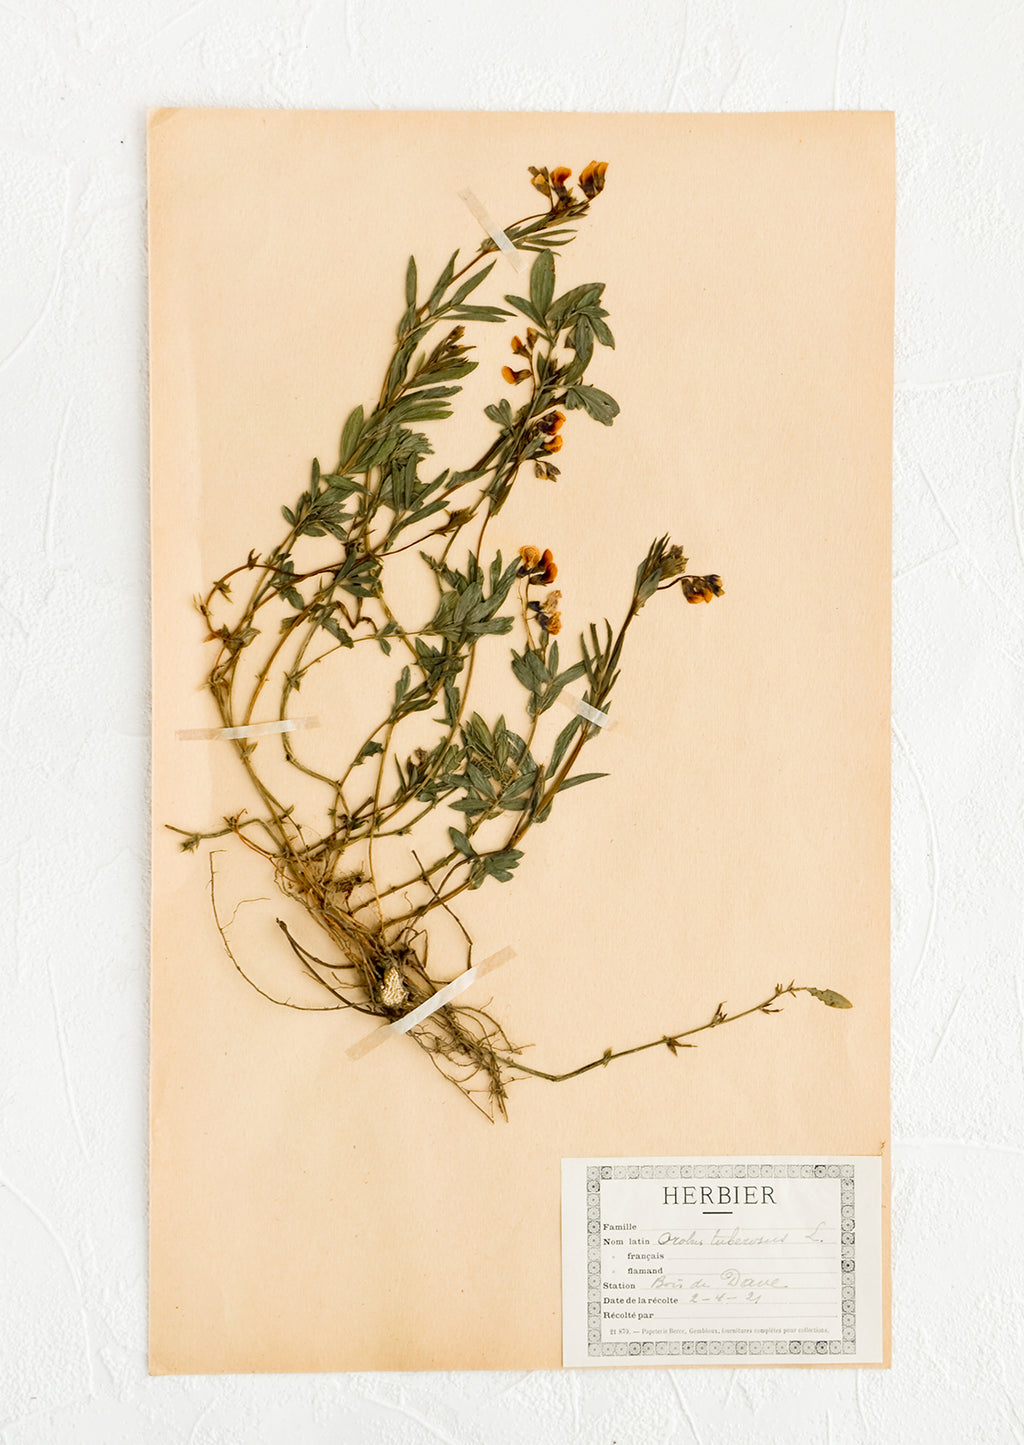 1: One hundred year old dried floral specimen (tuberose) on paper, used as artwork